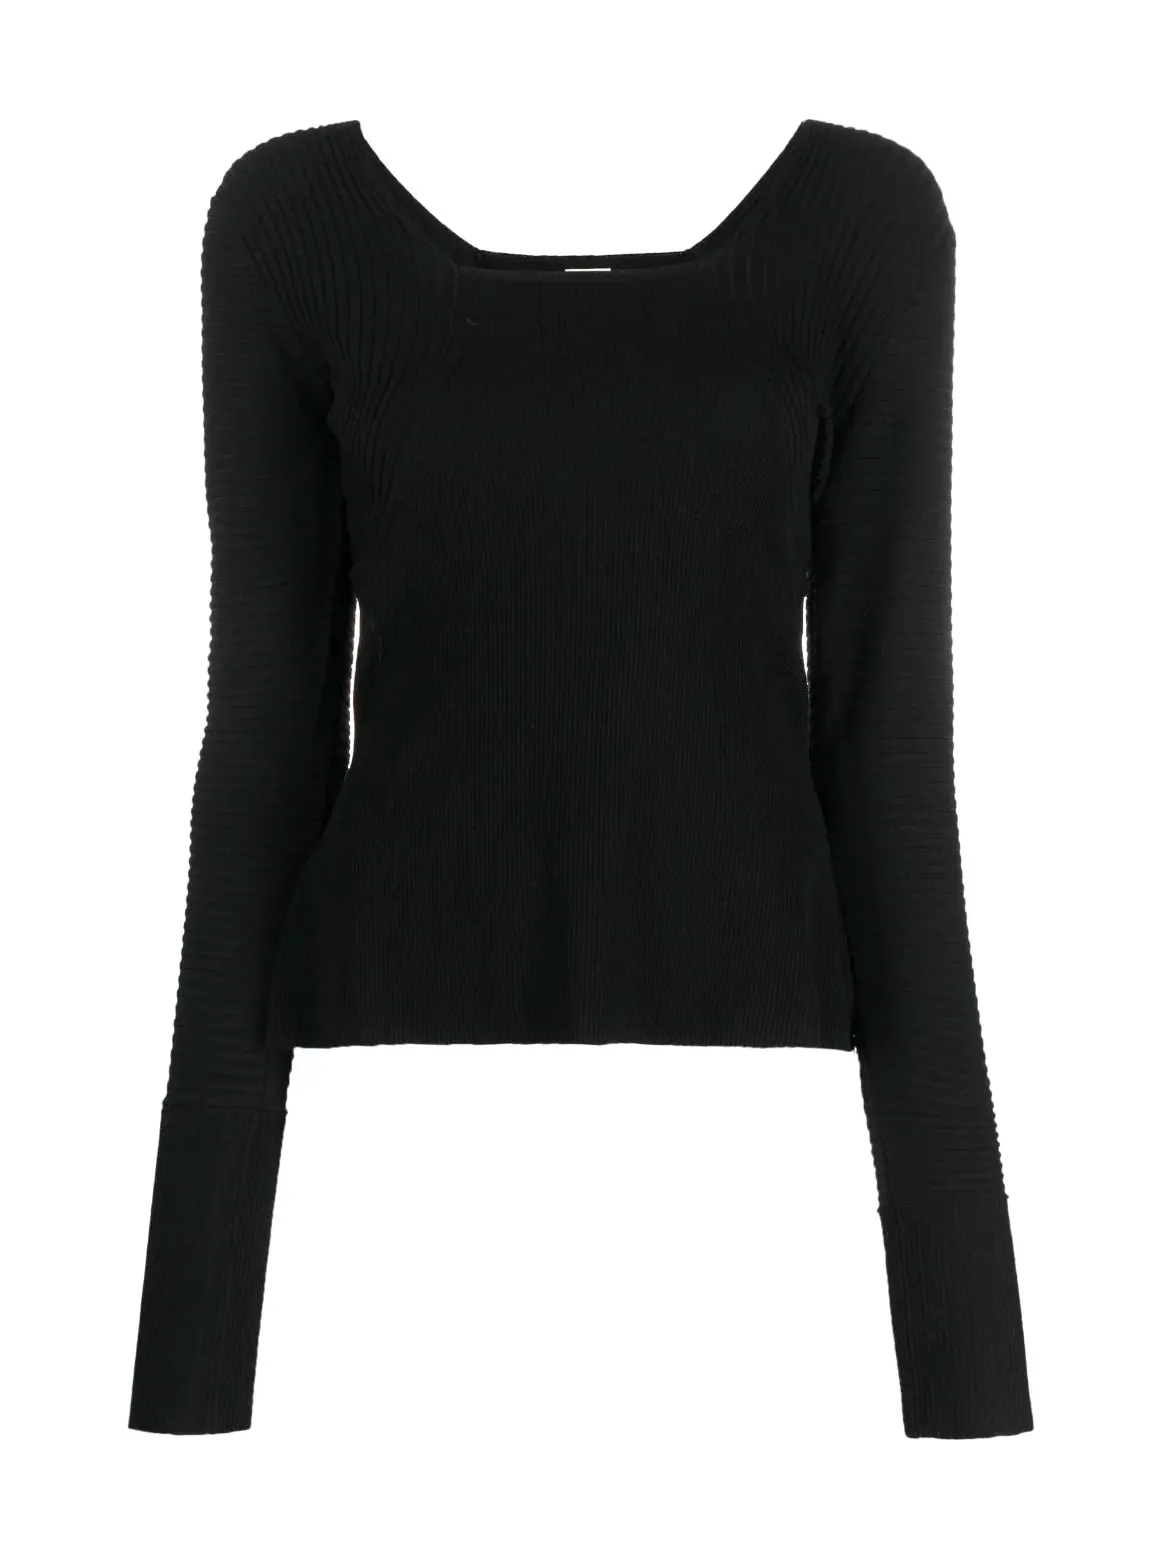 BY MALENE BIRGER: Laril stretch-rib knitted top, black